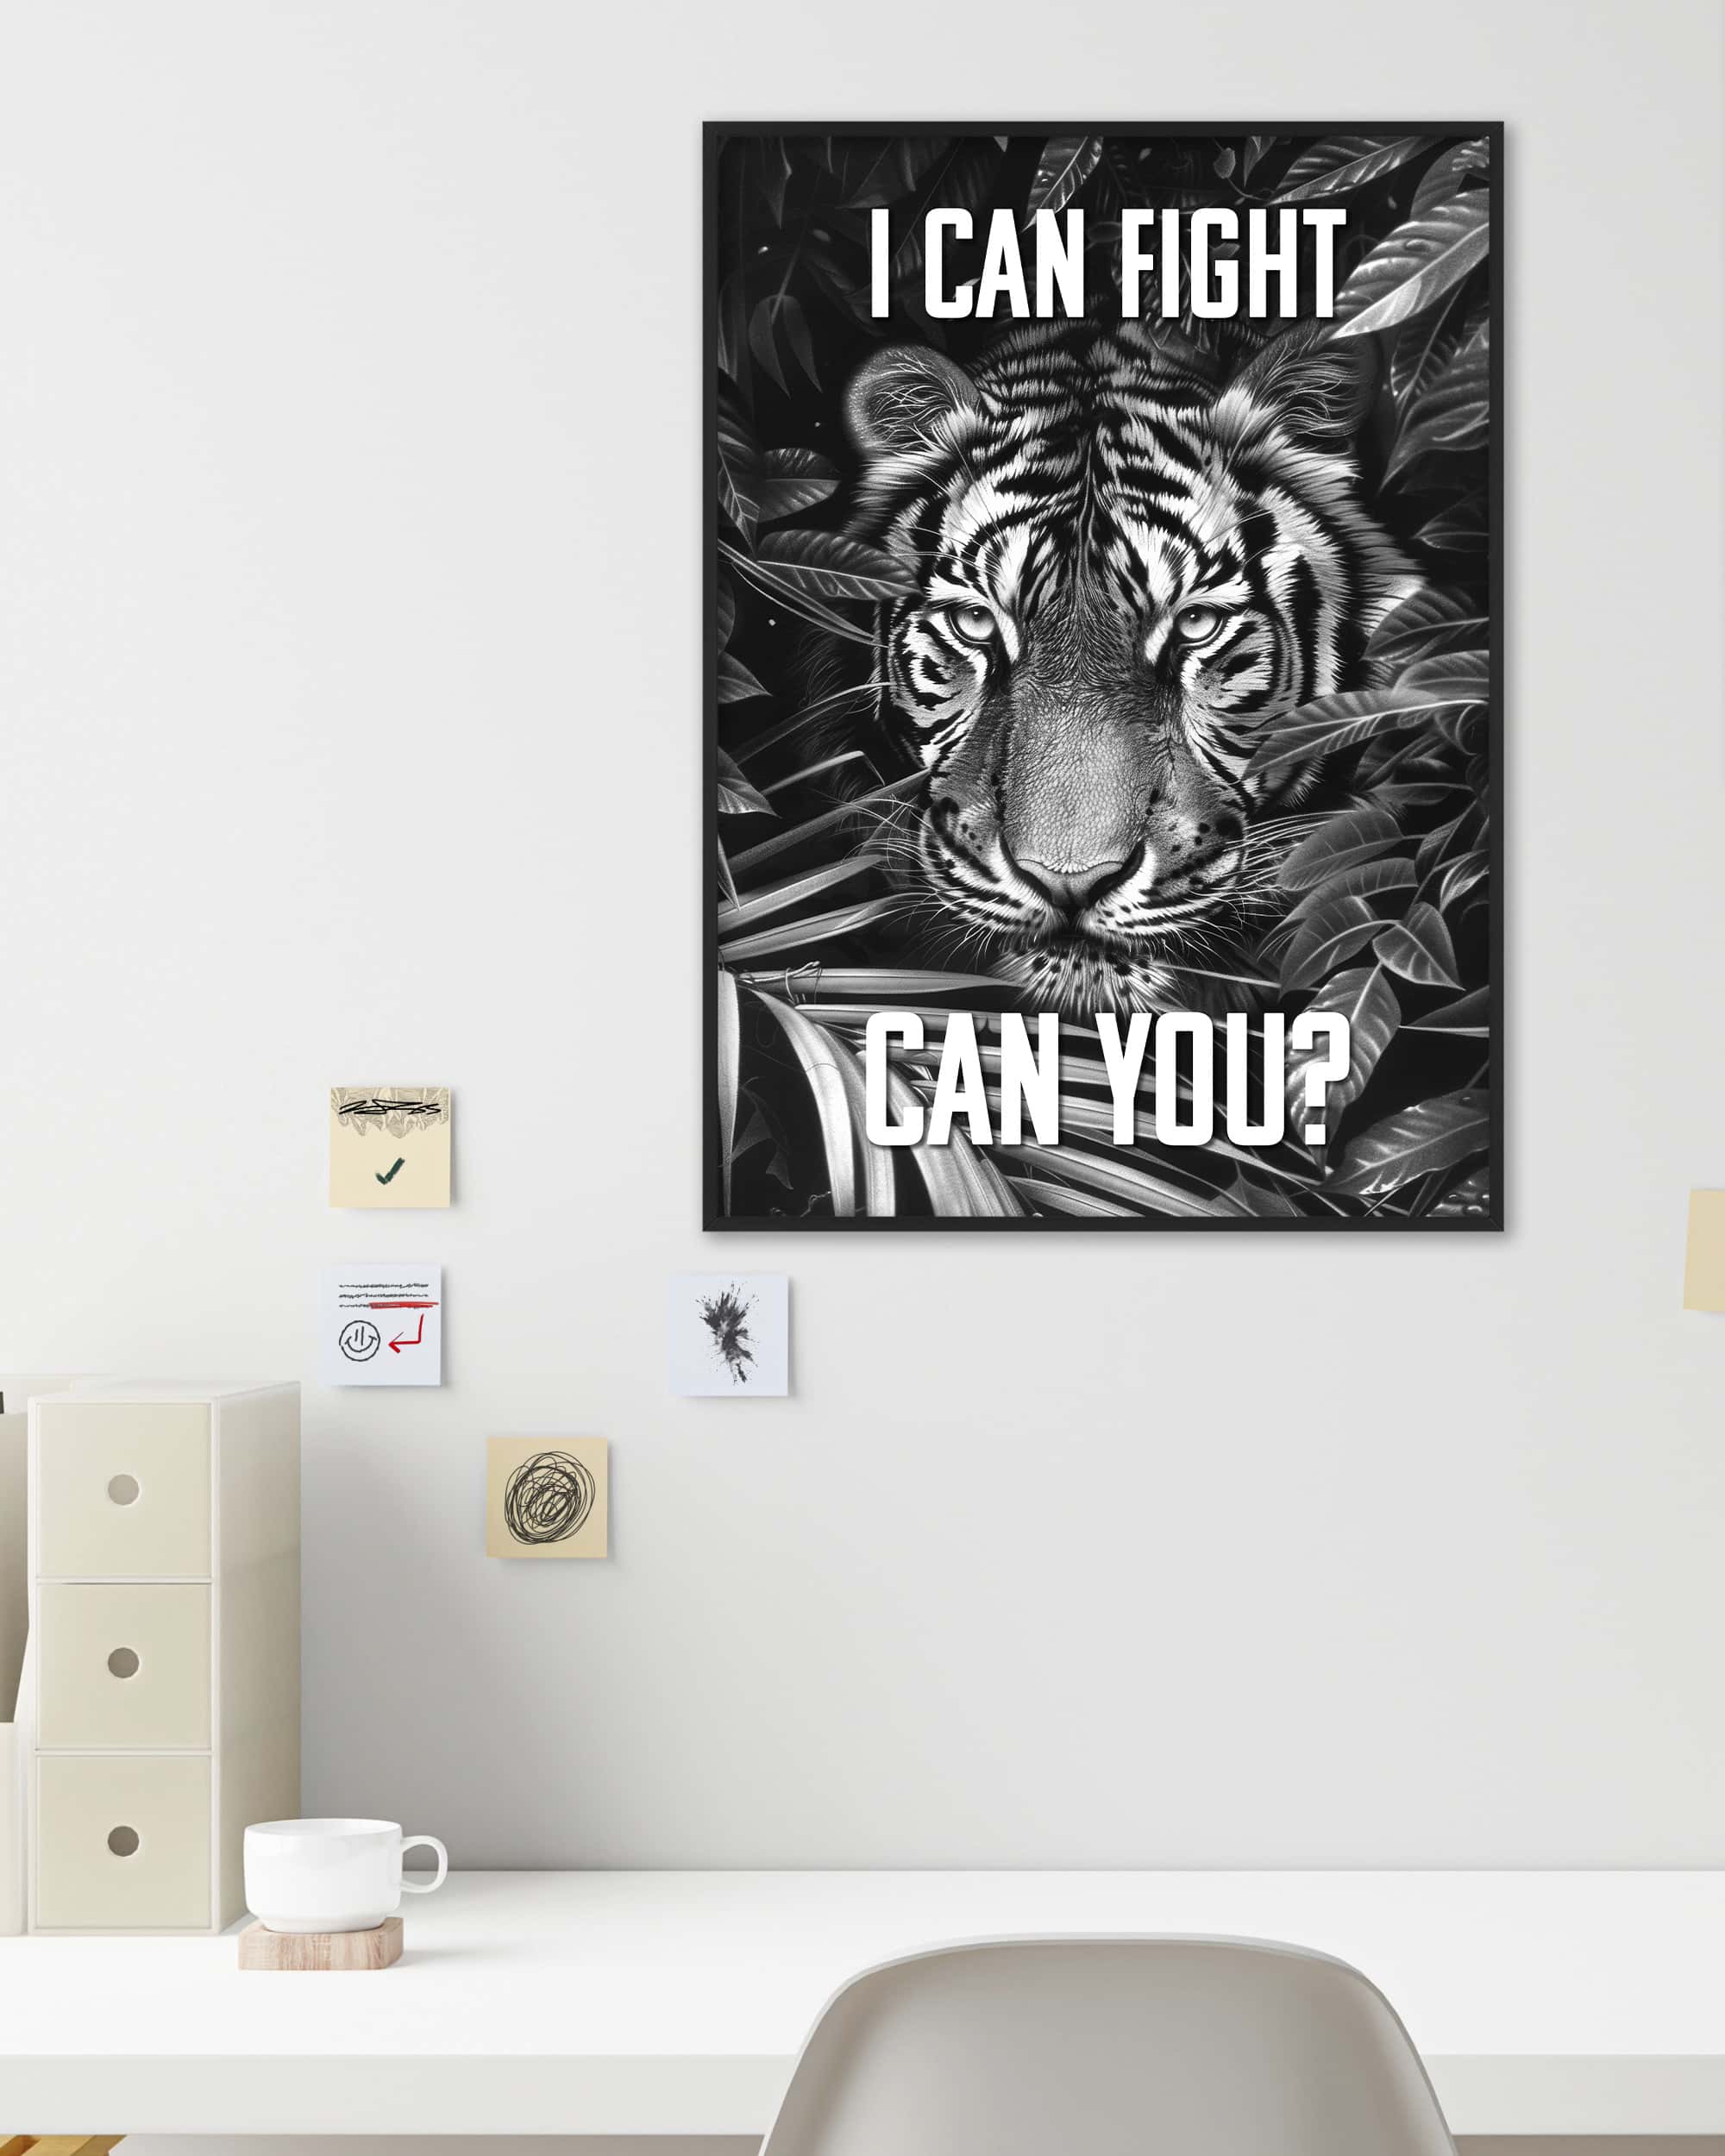 I can fight | Digital Poster